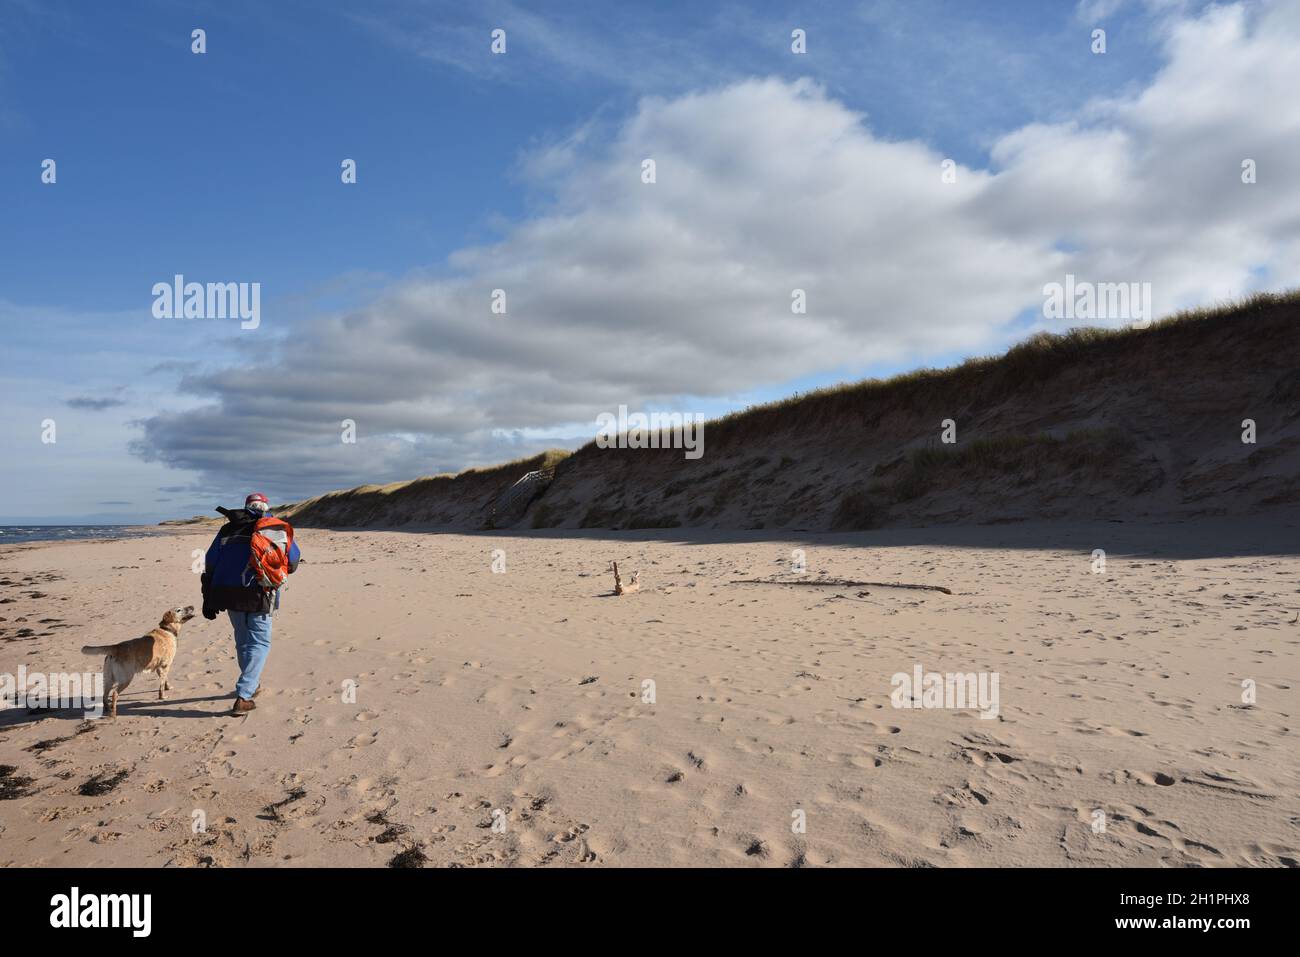 A man and his dog walk along a deserted beach in Prince Edward Island, Maritime Provinces, Canada, at Greenwich, Prince Edward Island National Park. Stock Photo